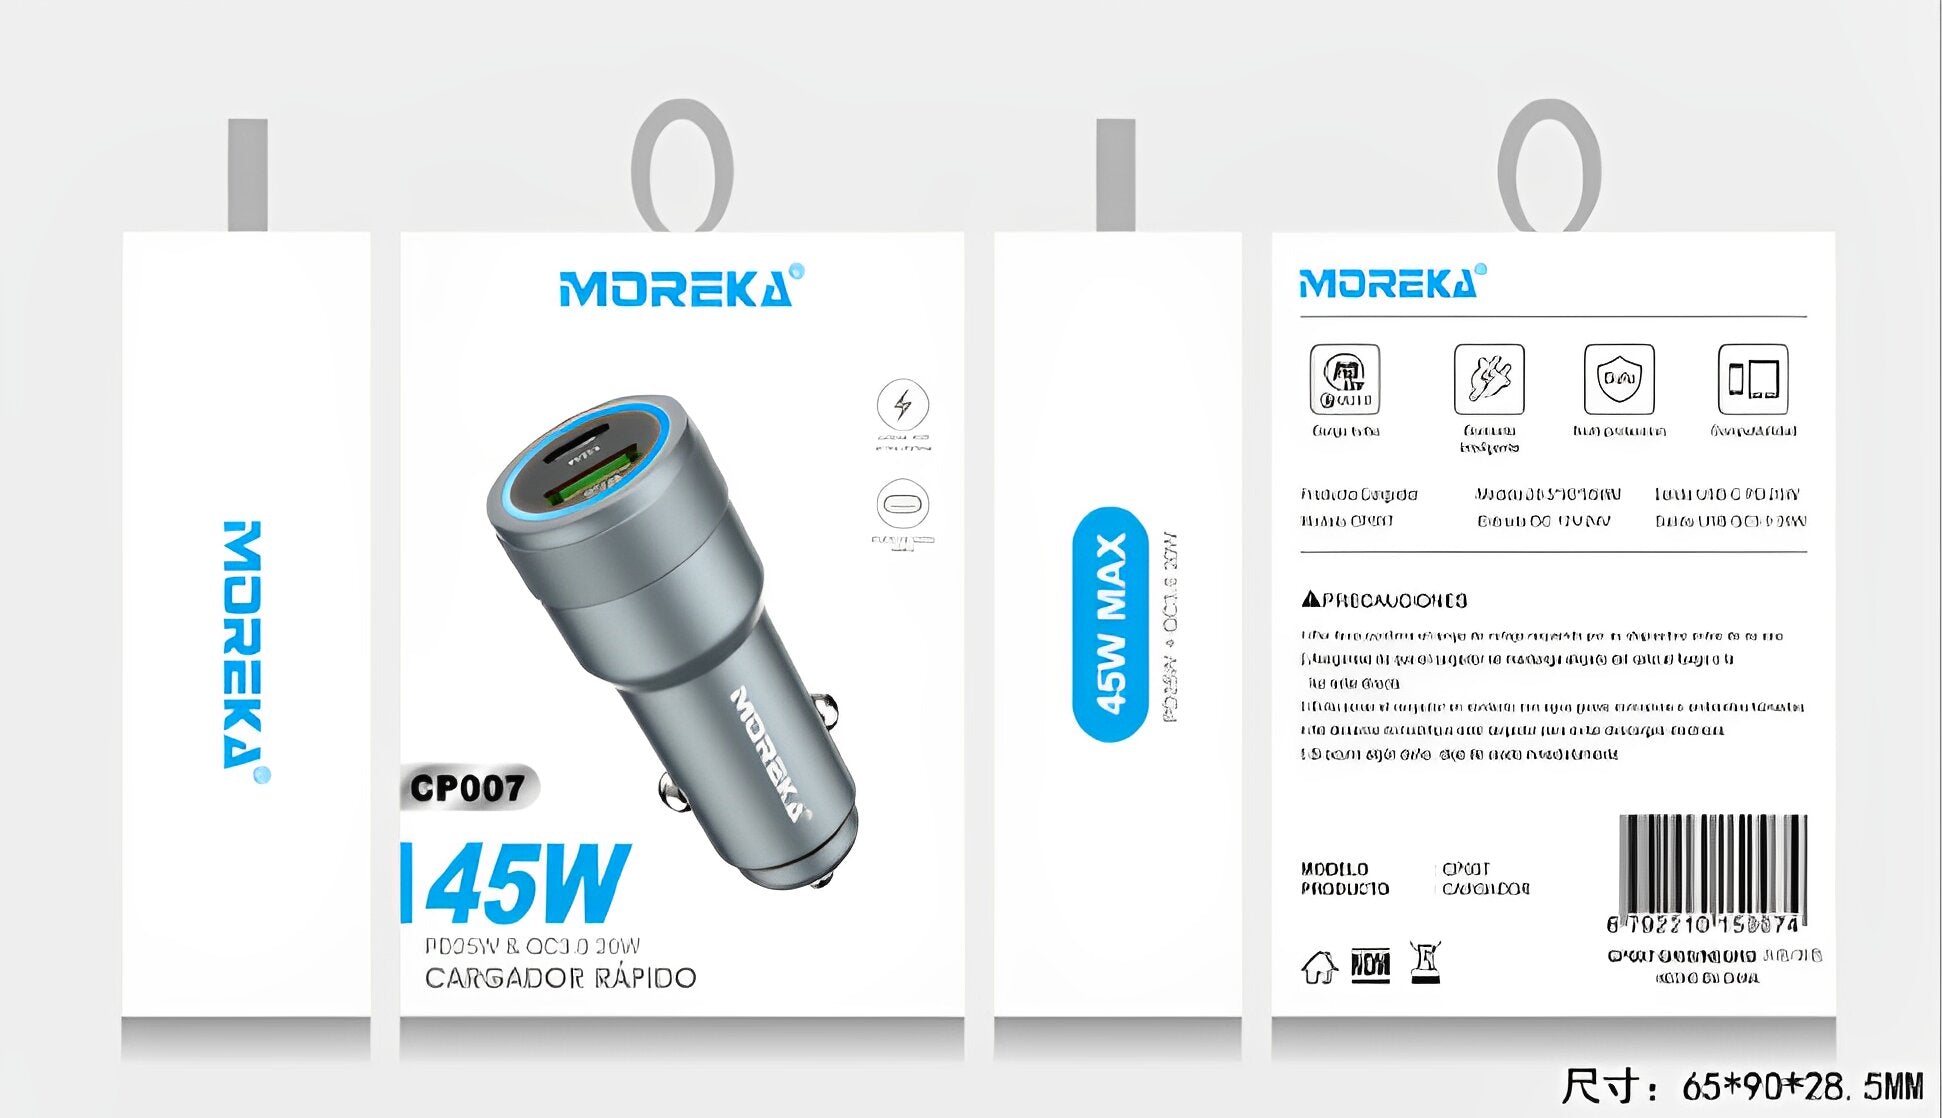 Moreka CP007 Plug In Car Charger 45W USB and C ports